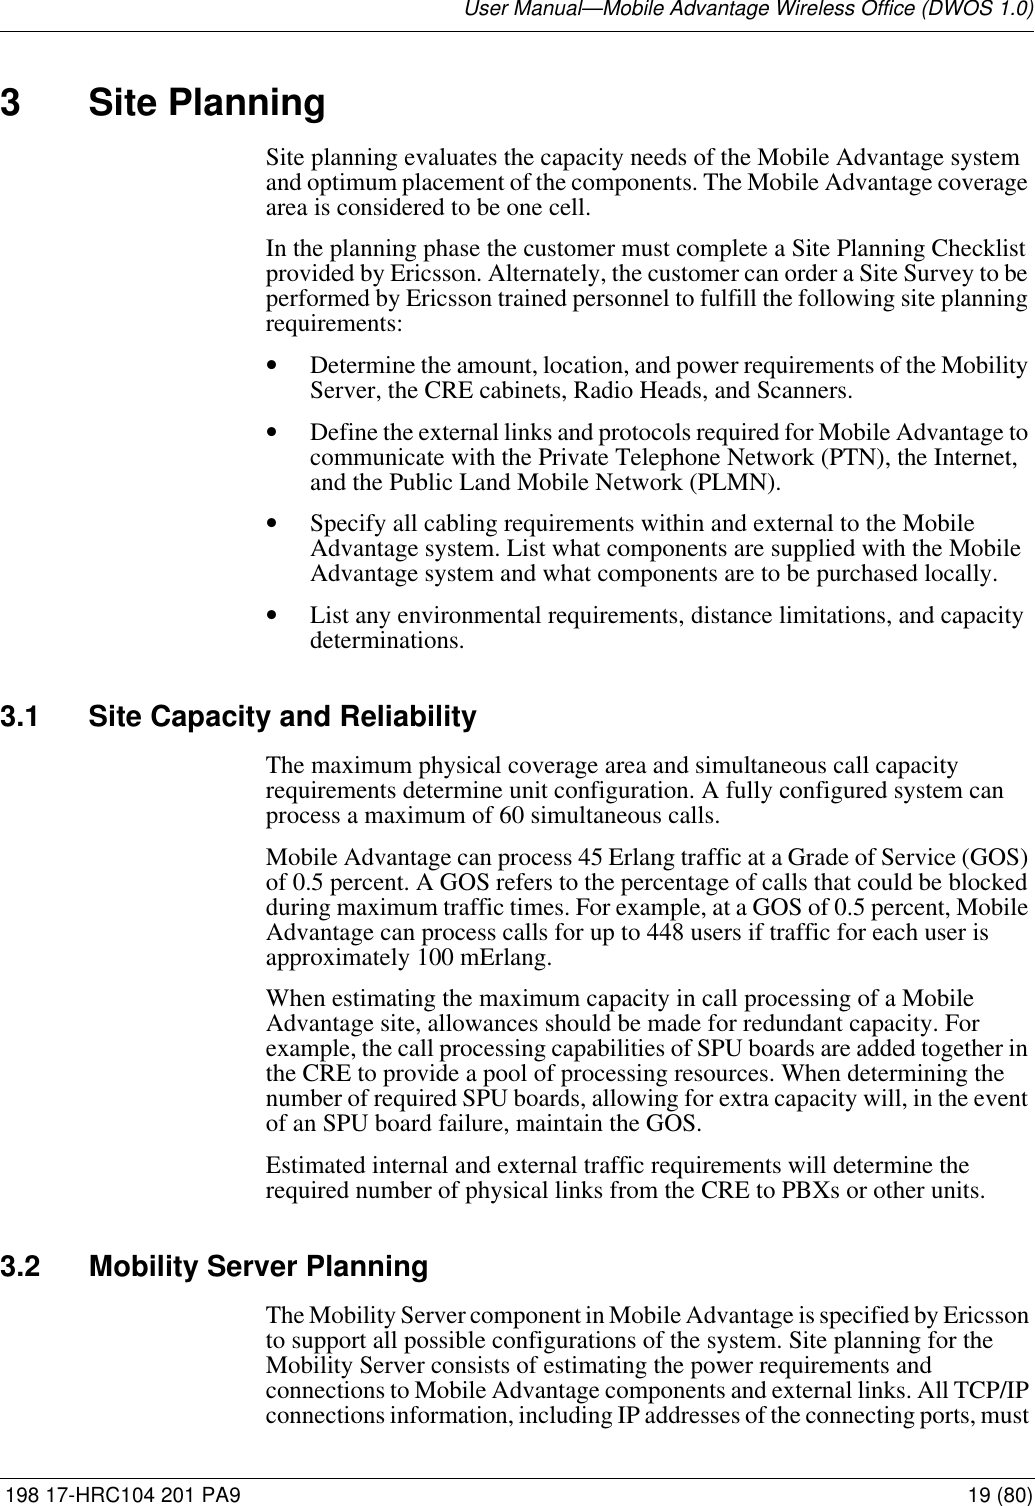 User Manual—Mobile Advantage Wireless Office (DWOS 1.0) 198 17-HRC104 201 PA9 19 (80)3 Site PlanningSite planning evaluates the capacity needs of the Mobile Advantage system and optimum placement of the components. The Mobile Advantage coverage area is considered to be one cell. In the planning phase the customer must complete a Site Planning Checklist provided by Ericsson. Alternately, the customer can order a Site Survey to be performed by Ericsson trained personnel to fulfill the following site planning requirements:•Determine the amount, location, and power requirements of the Mobility Server, the CRE cabinets, Radio Heads, and Scanners.•Define the external links and protocols required for Mobile Advantage to communicate with the Private Telephone Network (PTN), the Internet, and the Public Land Mobile Network (PLMN). •Specify all cabling requirements within and external to the Mobile Advantage system. List what components are supplied with the Mobile Advantage system and what components are to be purchased locally.•List any environmental requirements, distance limitations, and capacity determinations. 3.1 Site Capacity and ReliabilityThe maximum physical coverage area and simultaneous call capacity requirements determine unit configuration. A fully configured system can process a maximum of 60 simultaneous calls. Mobile Advantage can process 45 Erlang traffic at a Grade of Service (GOS) of 0.5 percent. A GOS refers to the percentage of calls that could be blocked during maximum traffic times. For example, at a GOS of 0.5 percent, Mobile Advantage can process calls for up to 448 users if traffic for each user is approximately 100 mErlang.When estimating the maximum capacity in call processing of a Mobile Advantage site, allowances should be made for redundant capacity. For example, the call processing capabilities of SPU boards are added together in the CRE to provide a pool of processing resources. When determining the number of required SPU boards, allowing for extra capacity will, in the event of an SPU board failure, maintain the GOS.Estimated internal and external traffic requirements will determine the required number of physical links from the CRE to PBXs or other units.3.2 Mobility Server PlanningThe Mobility Server component in Mobile Advantage is specified by Ericsson to support all possible configurations of the system. Site planning for the Mobility Server consists of estimating the power requirements and connections to Mobile Advantage components and external links. All TCP/IP connections information, including IP addresses of the connecting ports, must 